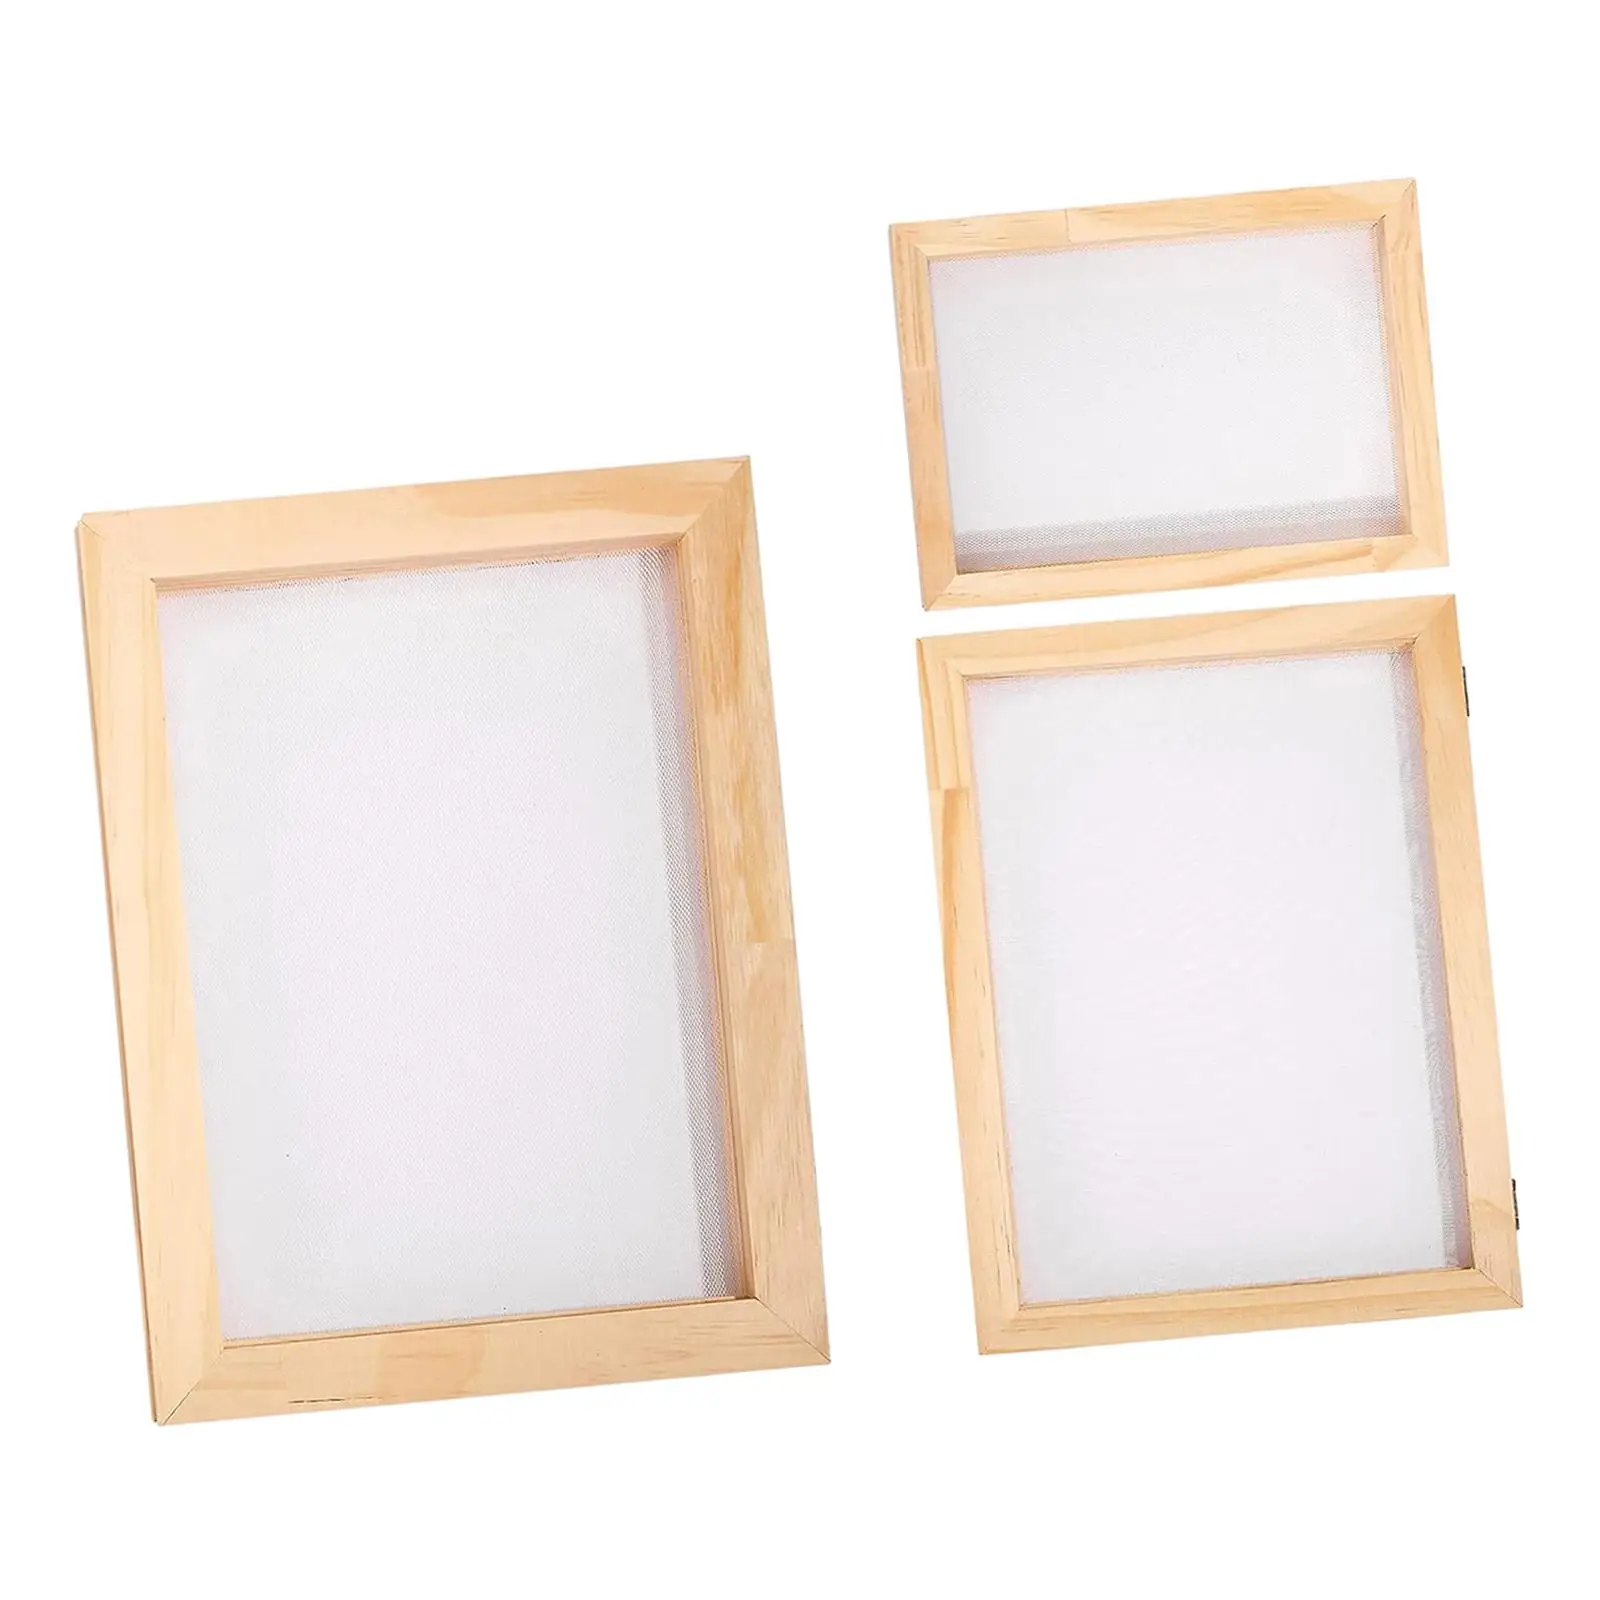 Paper Making Frame Screen Useful DIY Paper Crafts Papermaking Supplies Handmade Early Educational Learning Toy 3 Sizes Frame